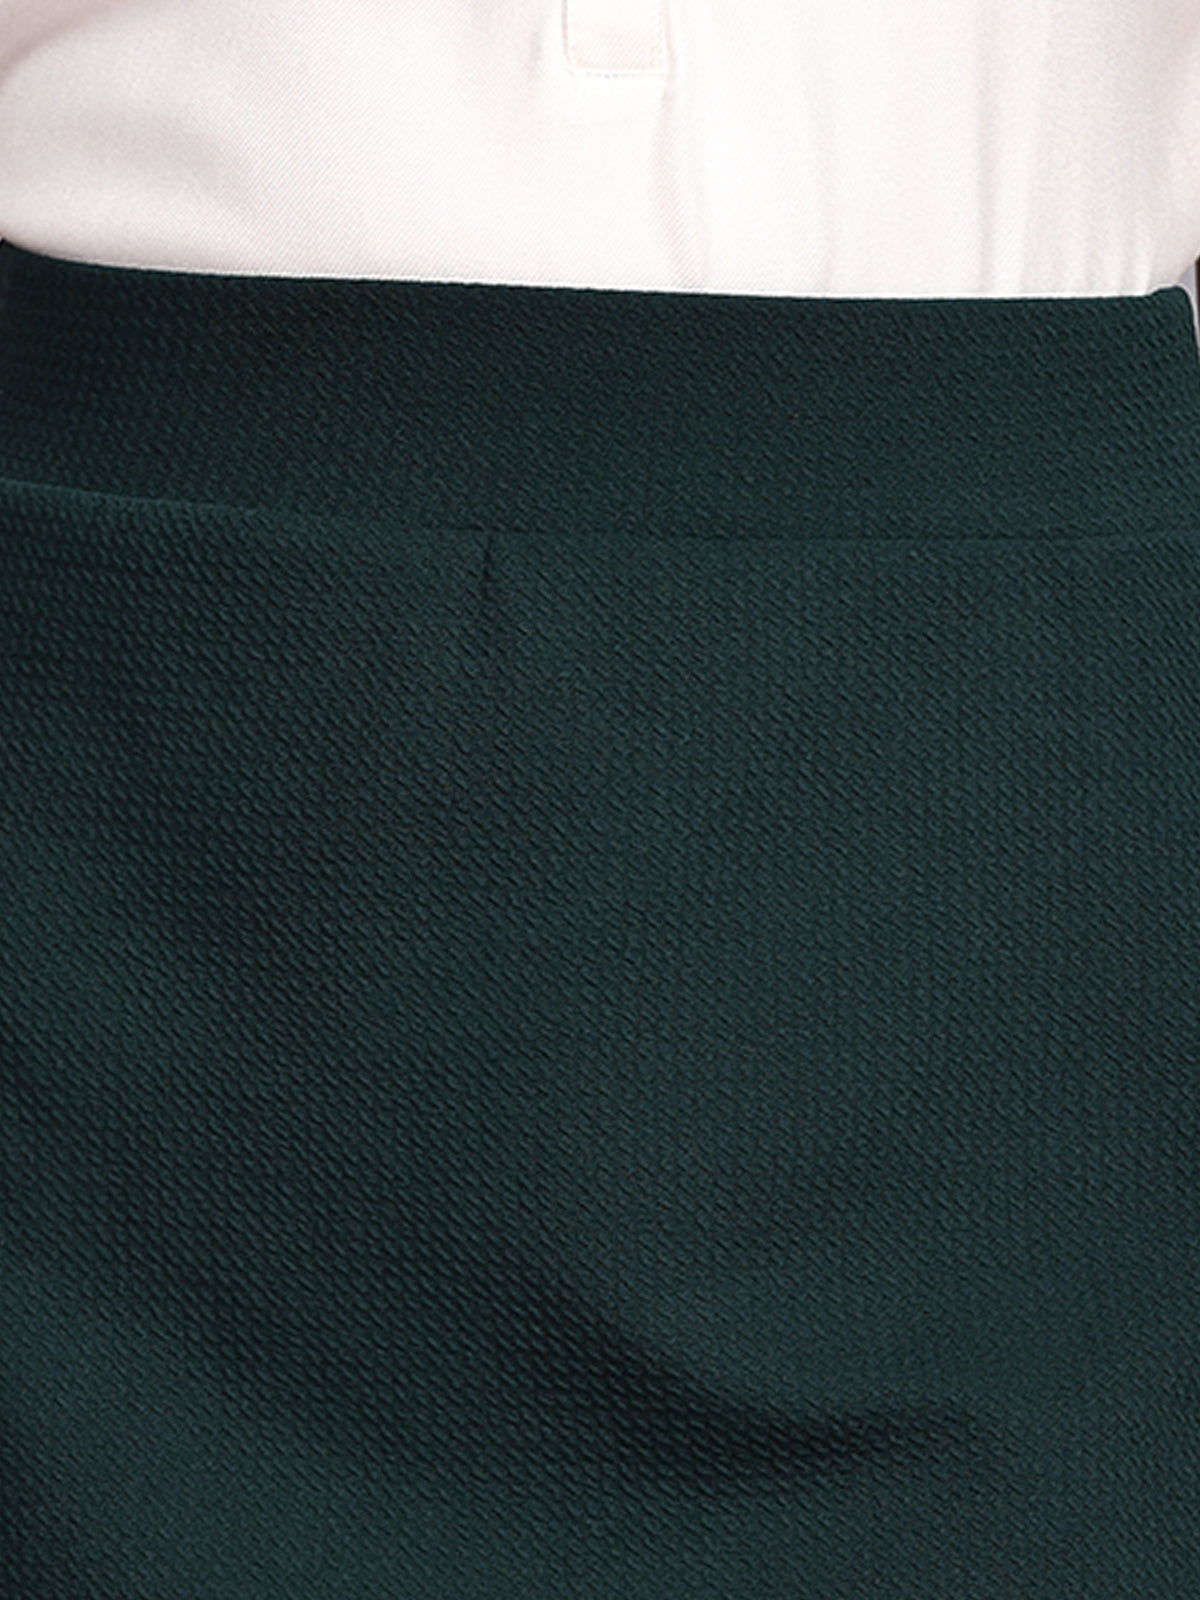 Green Skirt With Side Slit